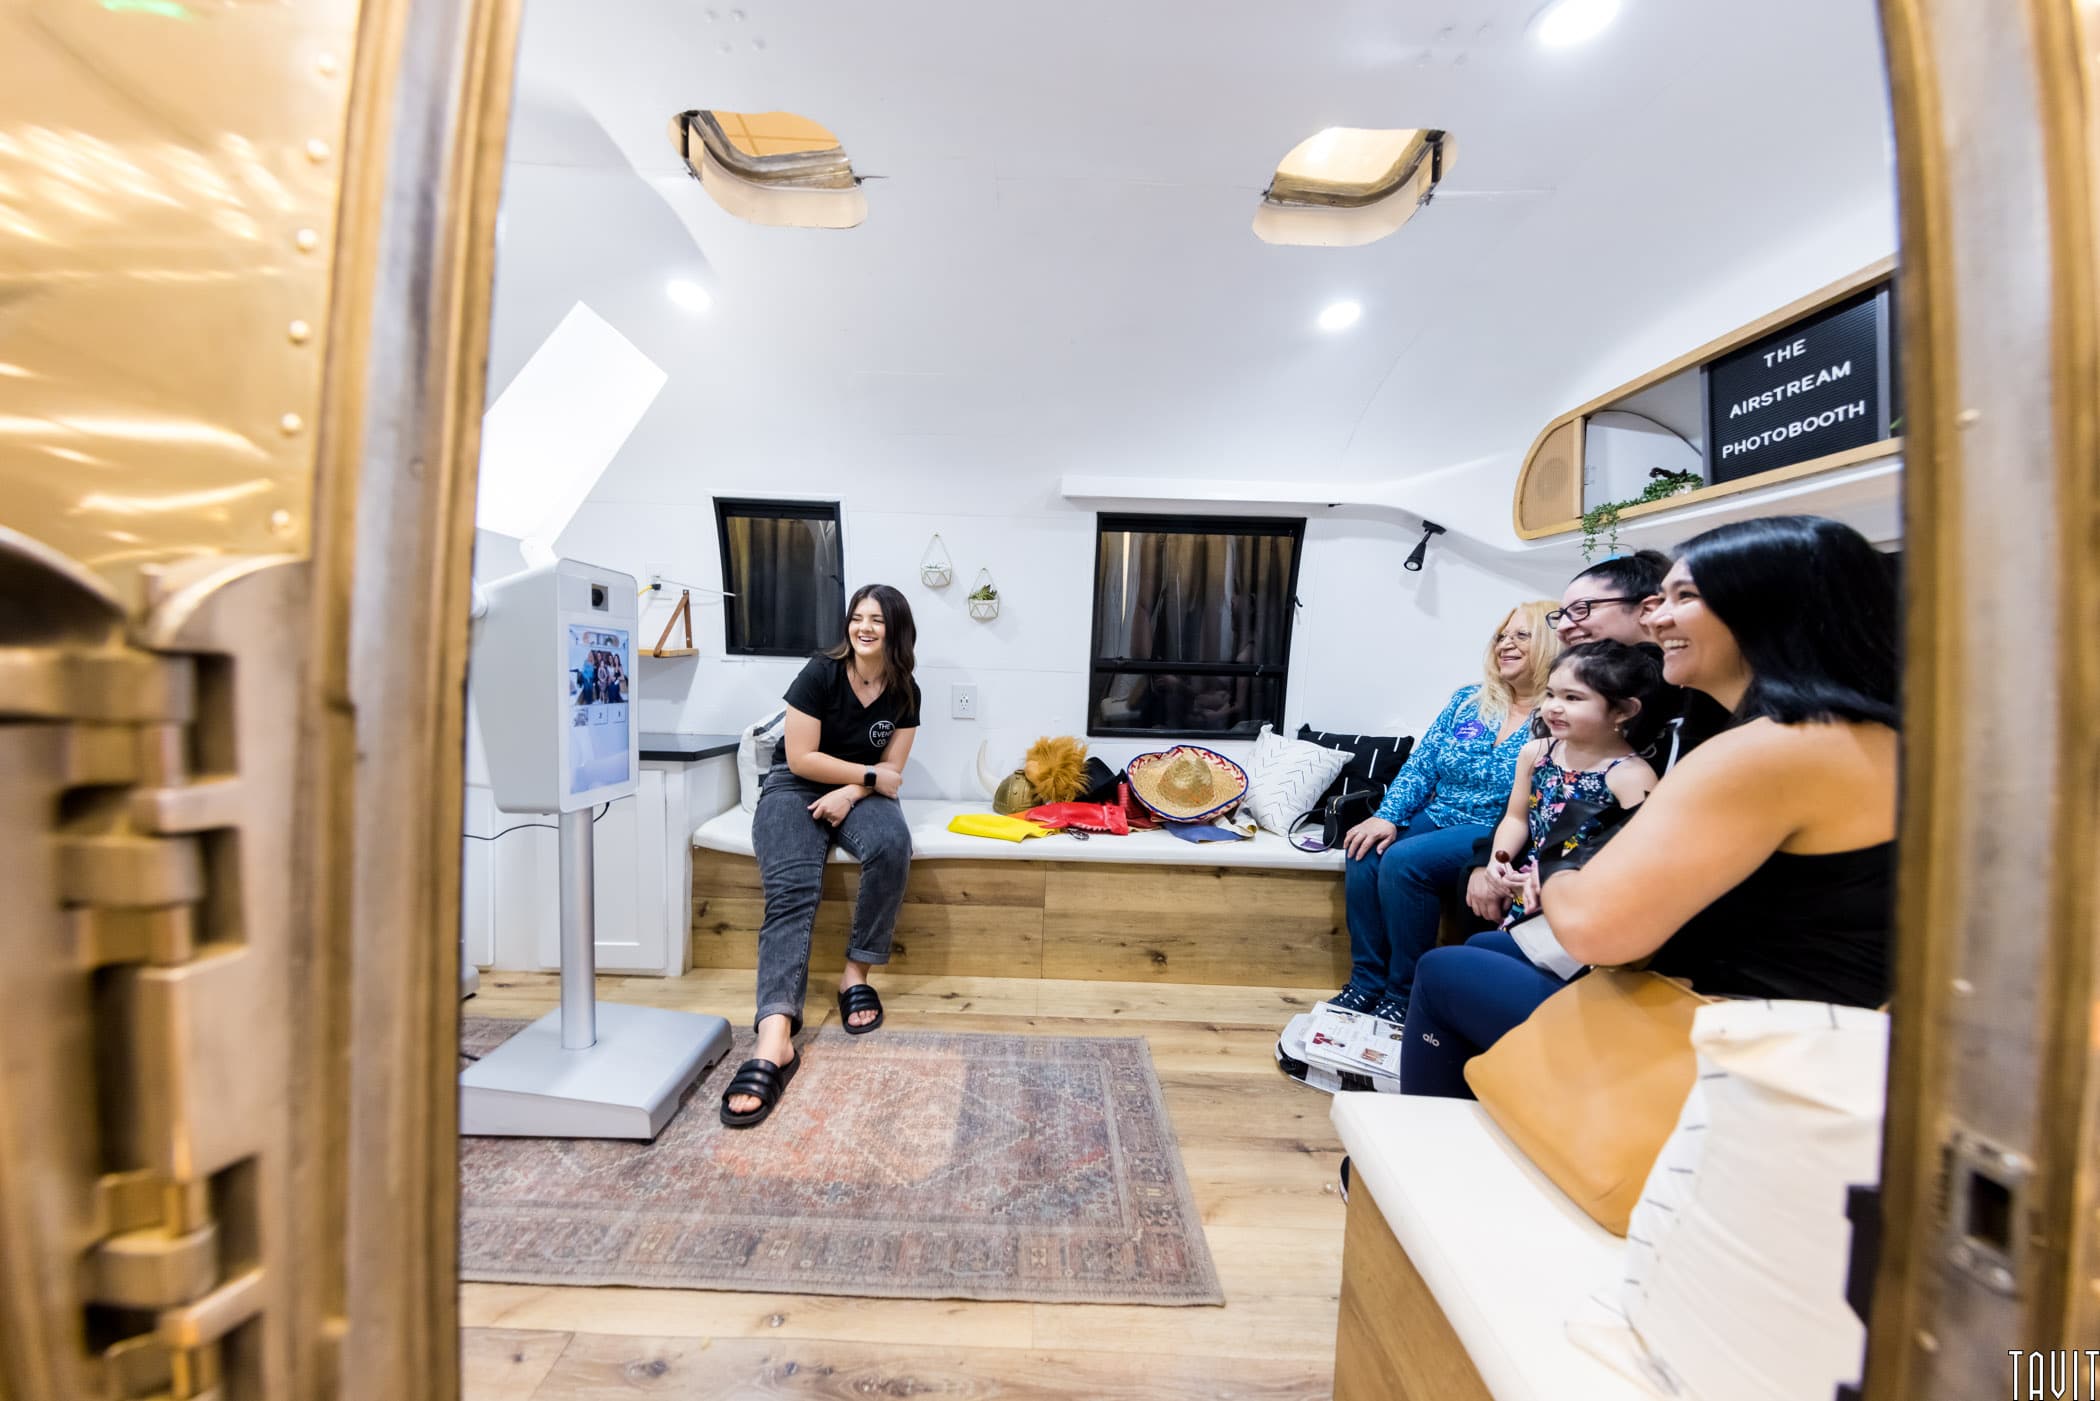 Group of people in the Airstream Photobooth